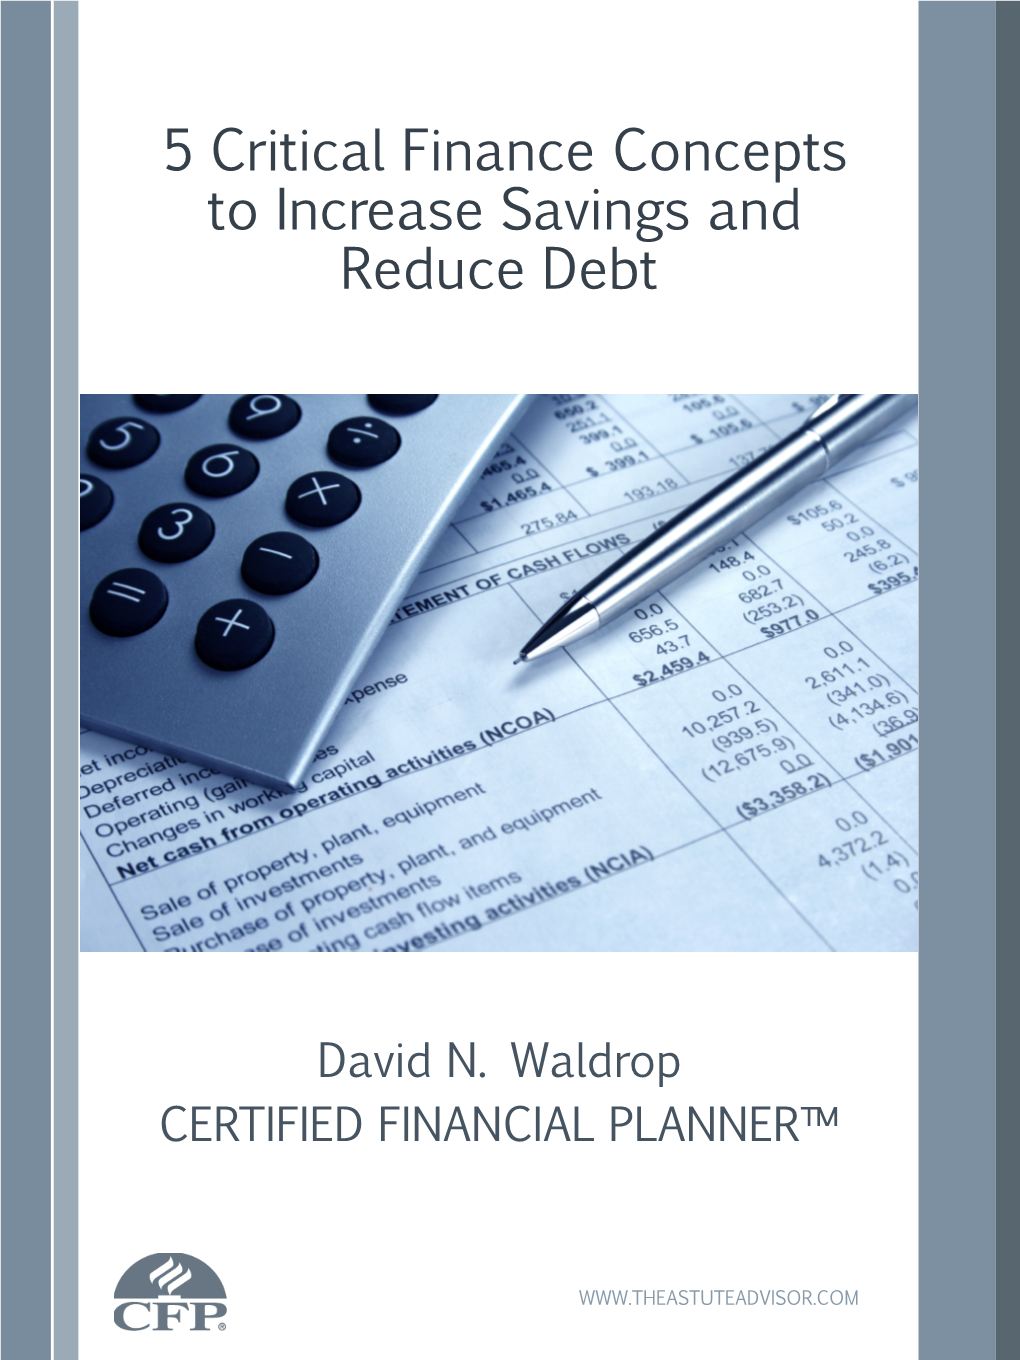 5 Critical Finance Concepts to Increase Savings and Reduce Debt